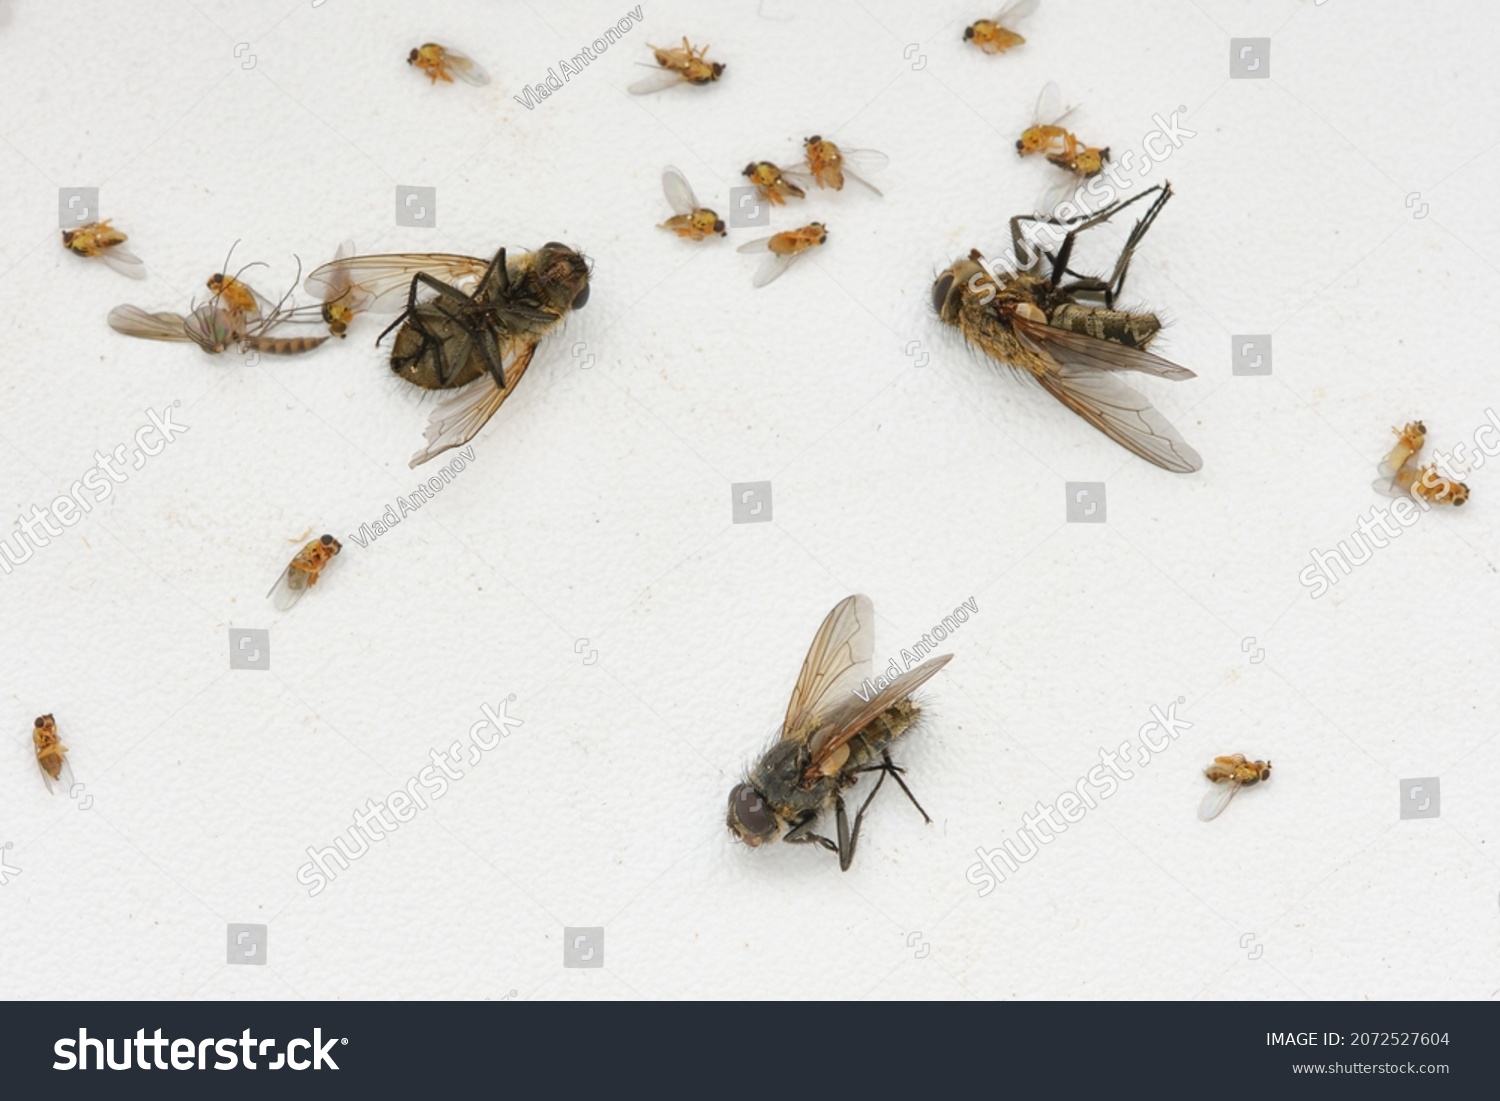 Dead flies on a white windowsill. Many dead house flies lies on a windowsill. Black dead body of the fly lying on the white table or windowsill #2072527604